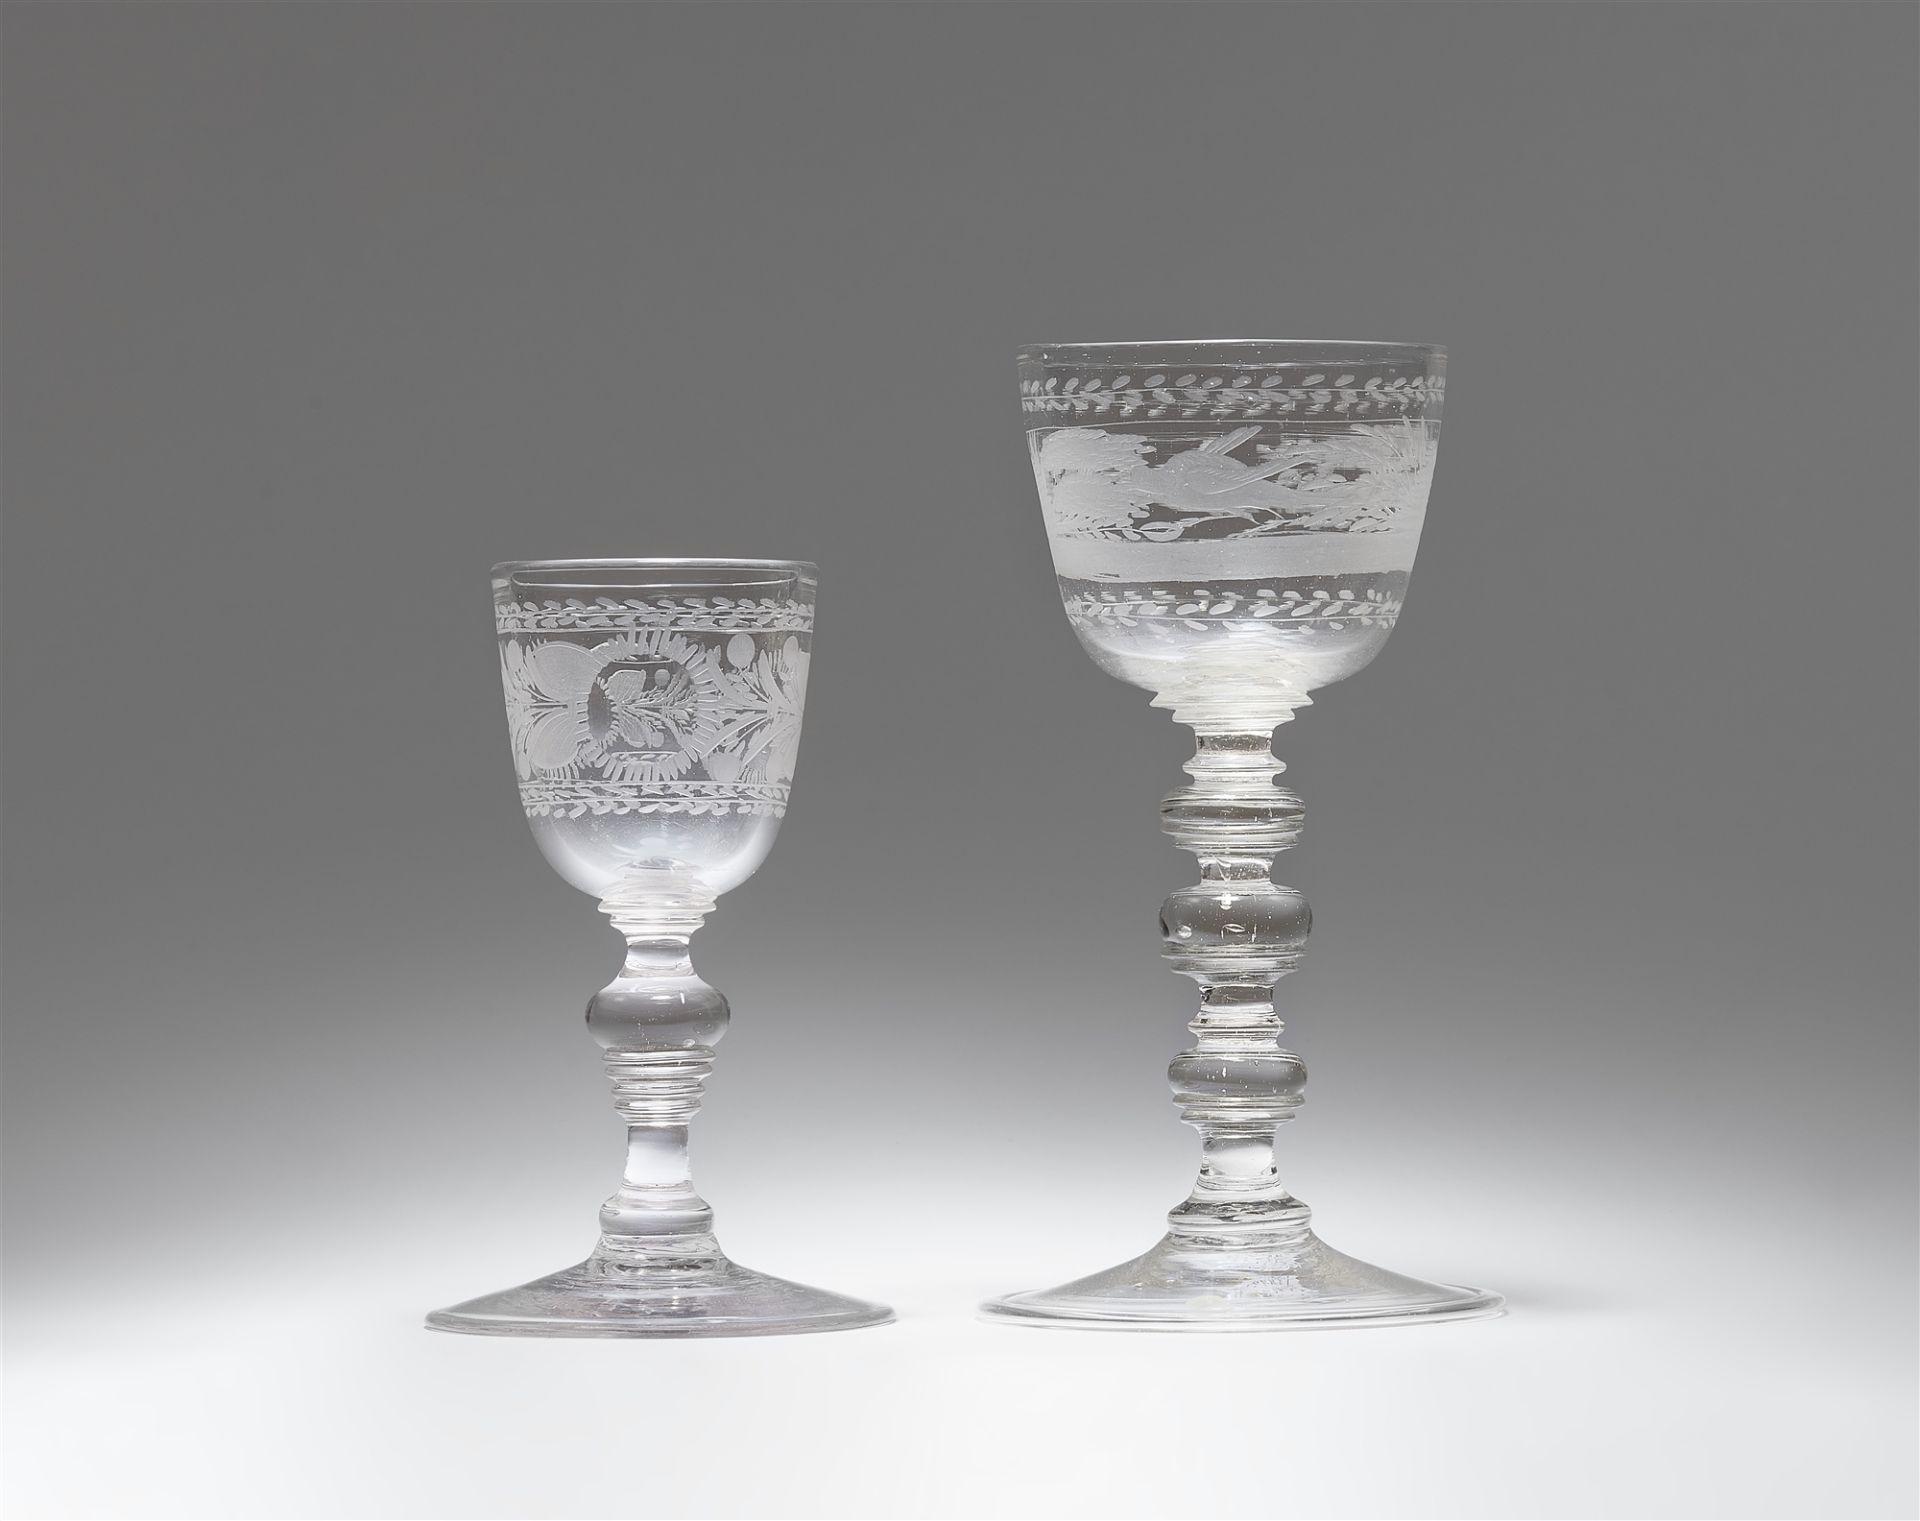 Two cut glass goblets with layered shafts